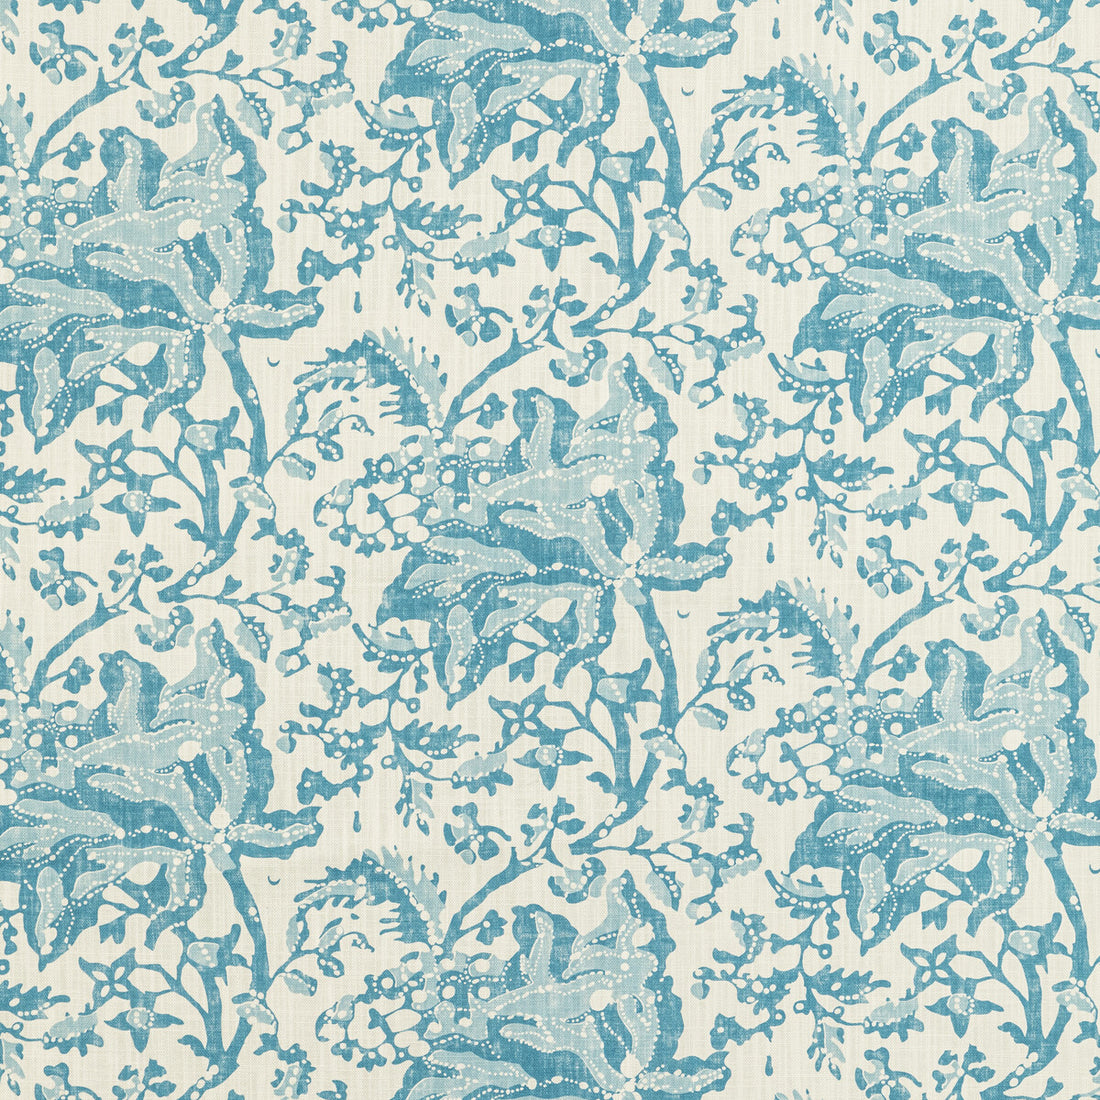 Weymouth Print fabric in aqua color - pattern 8022102.1313.0 - by Brunschwig &amp; Fils in the Manoir collection